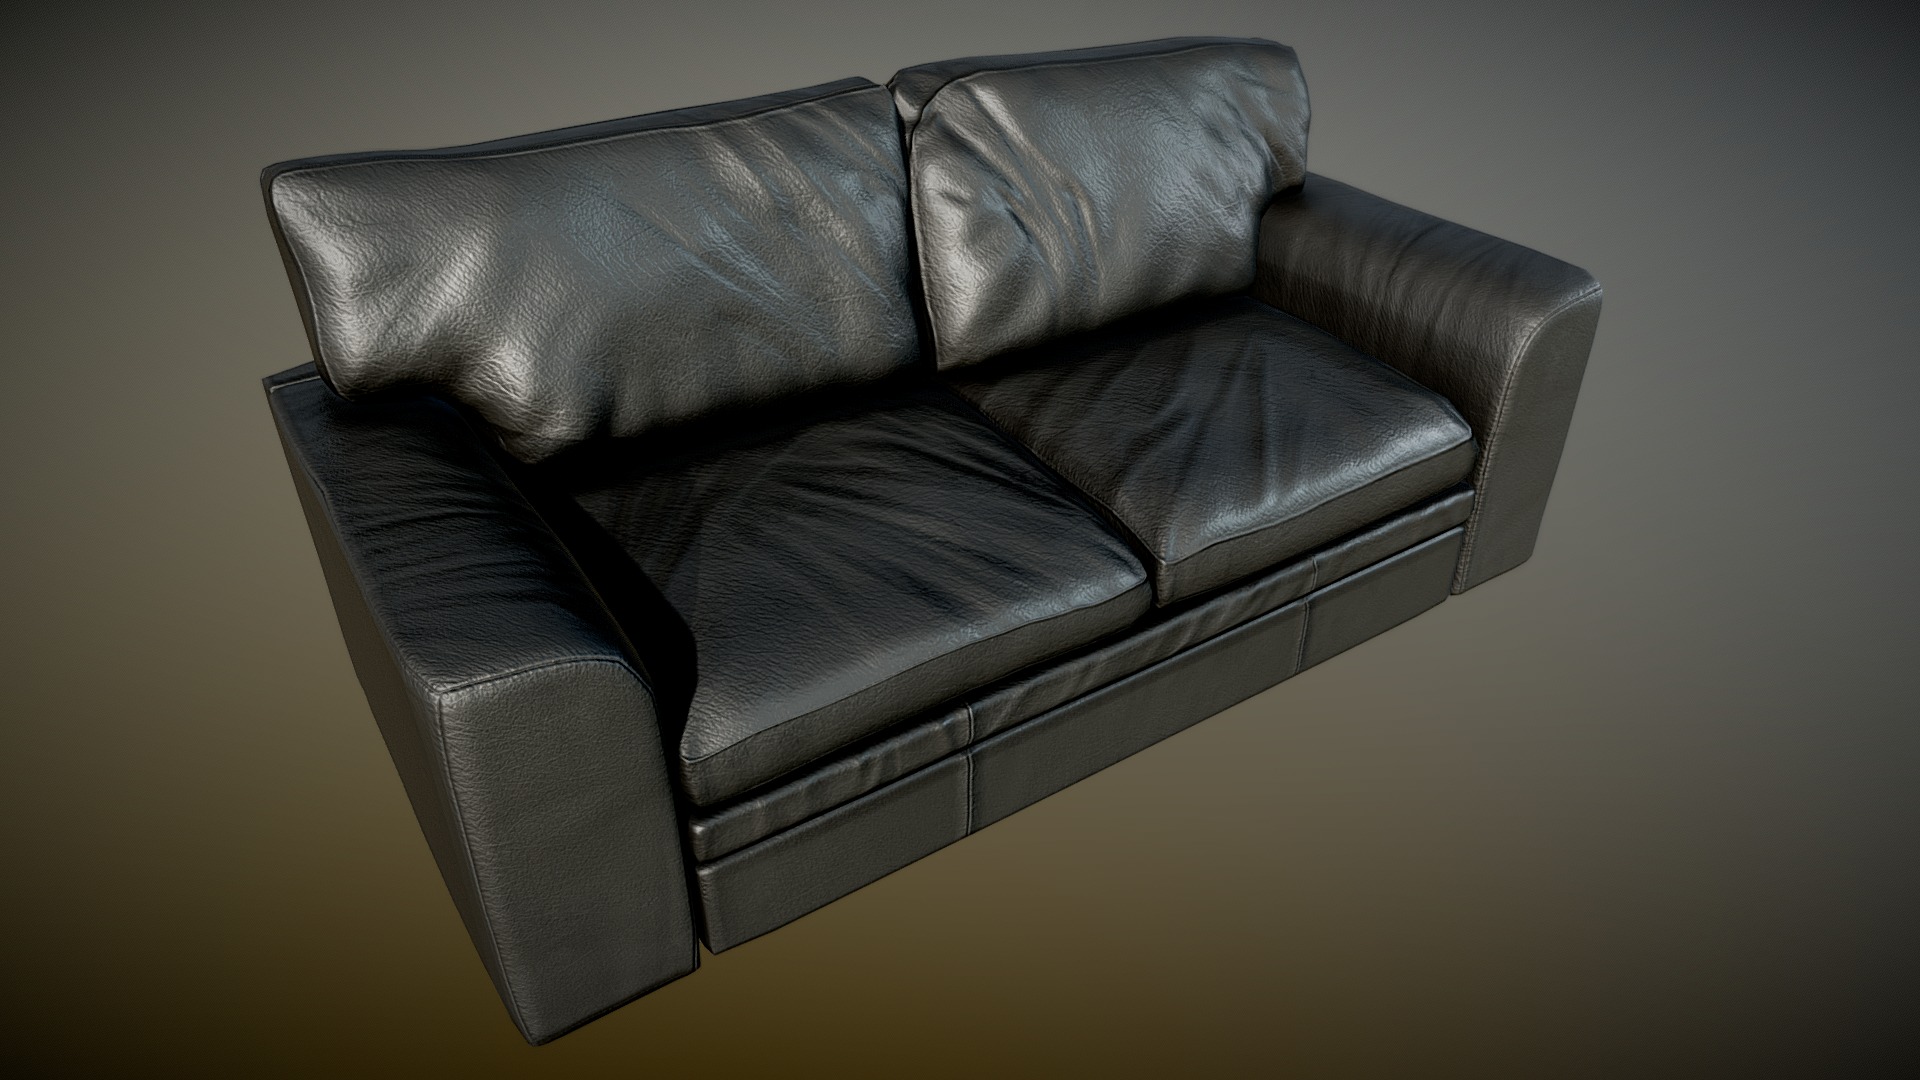 3D model Old Clean Leather Couch Black – PBR - This is a 3D model of the Old Clean Leather Couch Black - PBR. The 3D model is about a black leather couch.